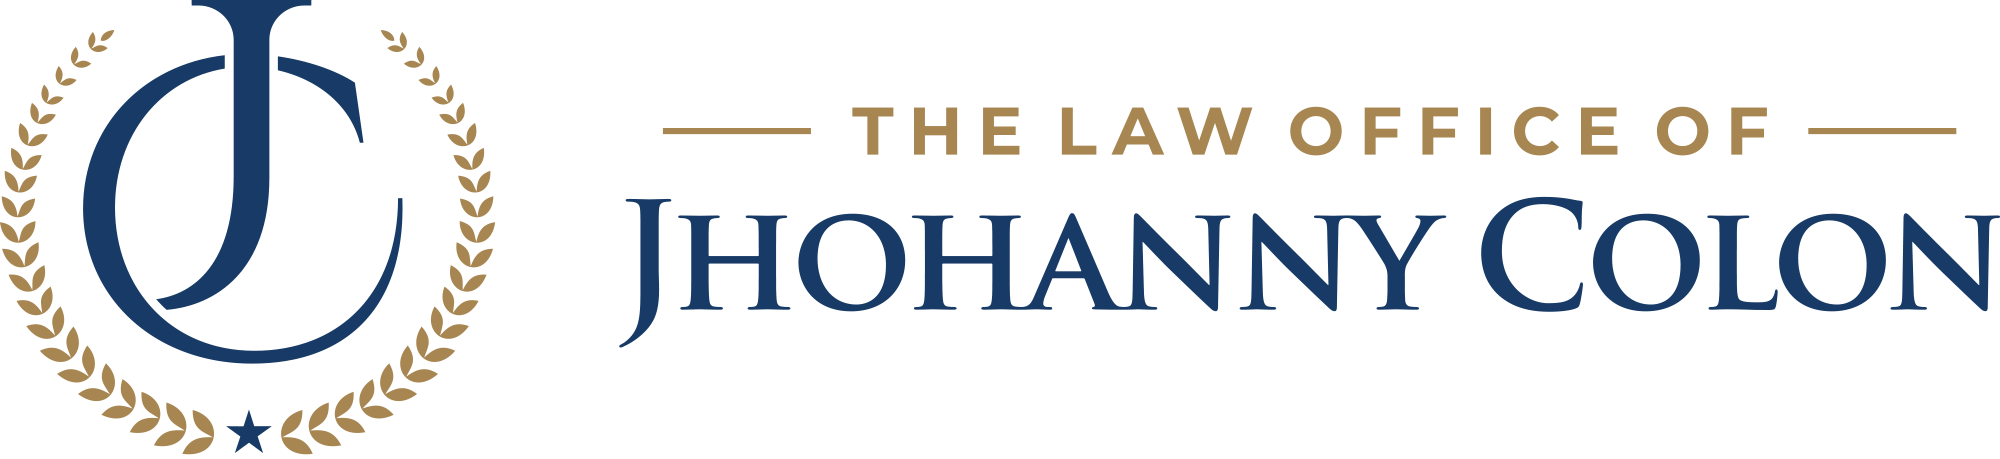 Jhohanny Colon Law Firm